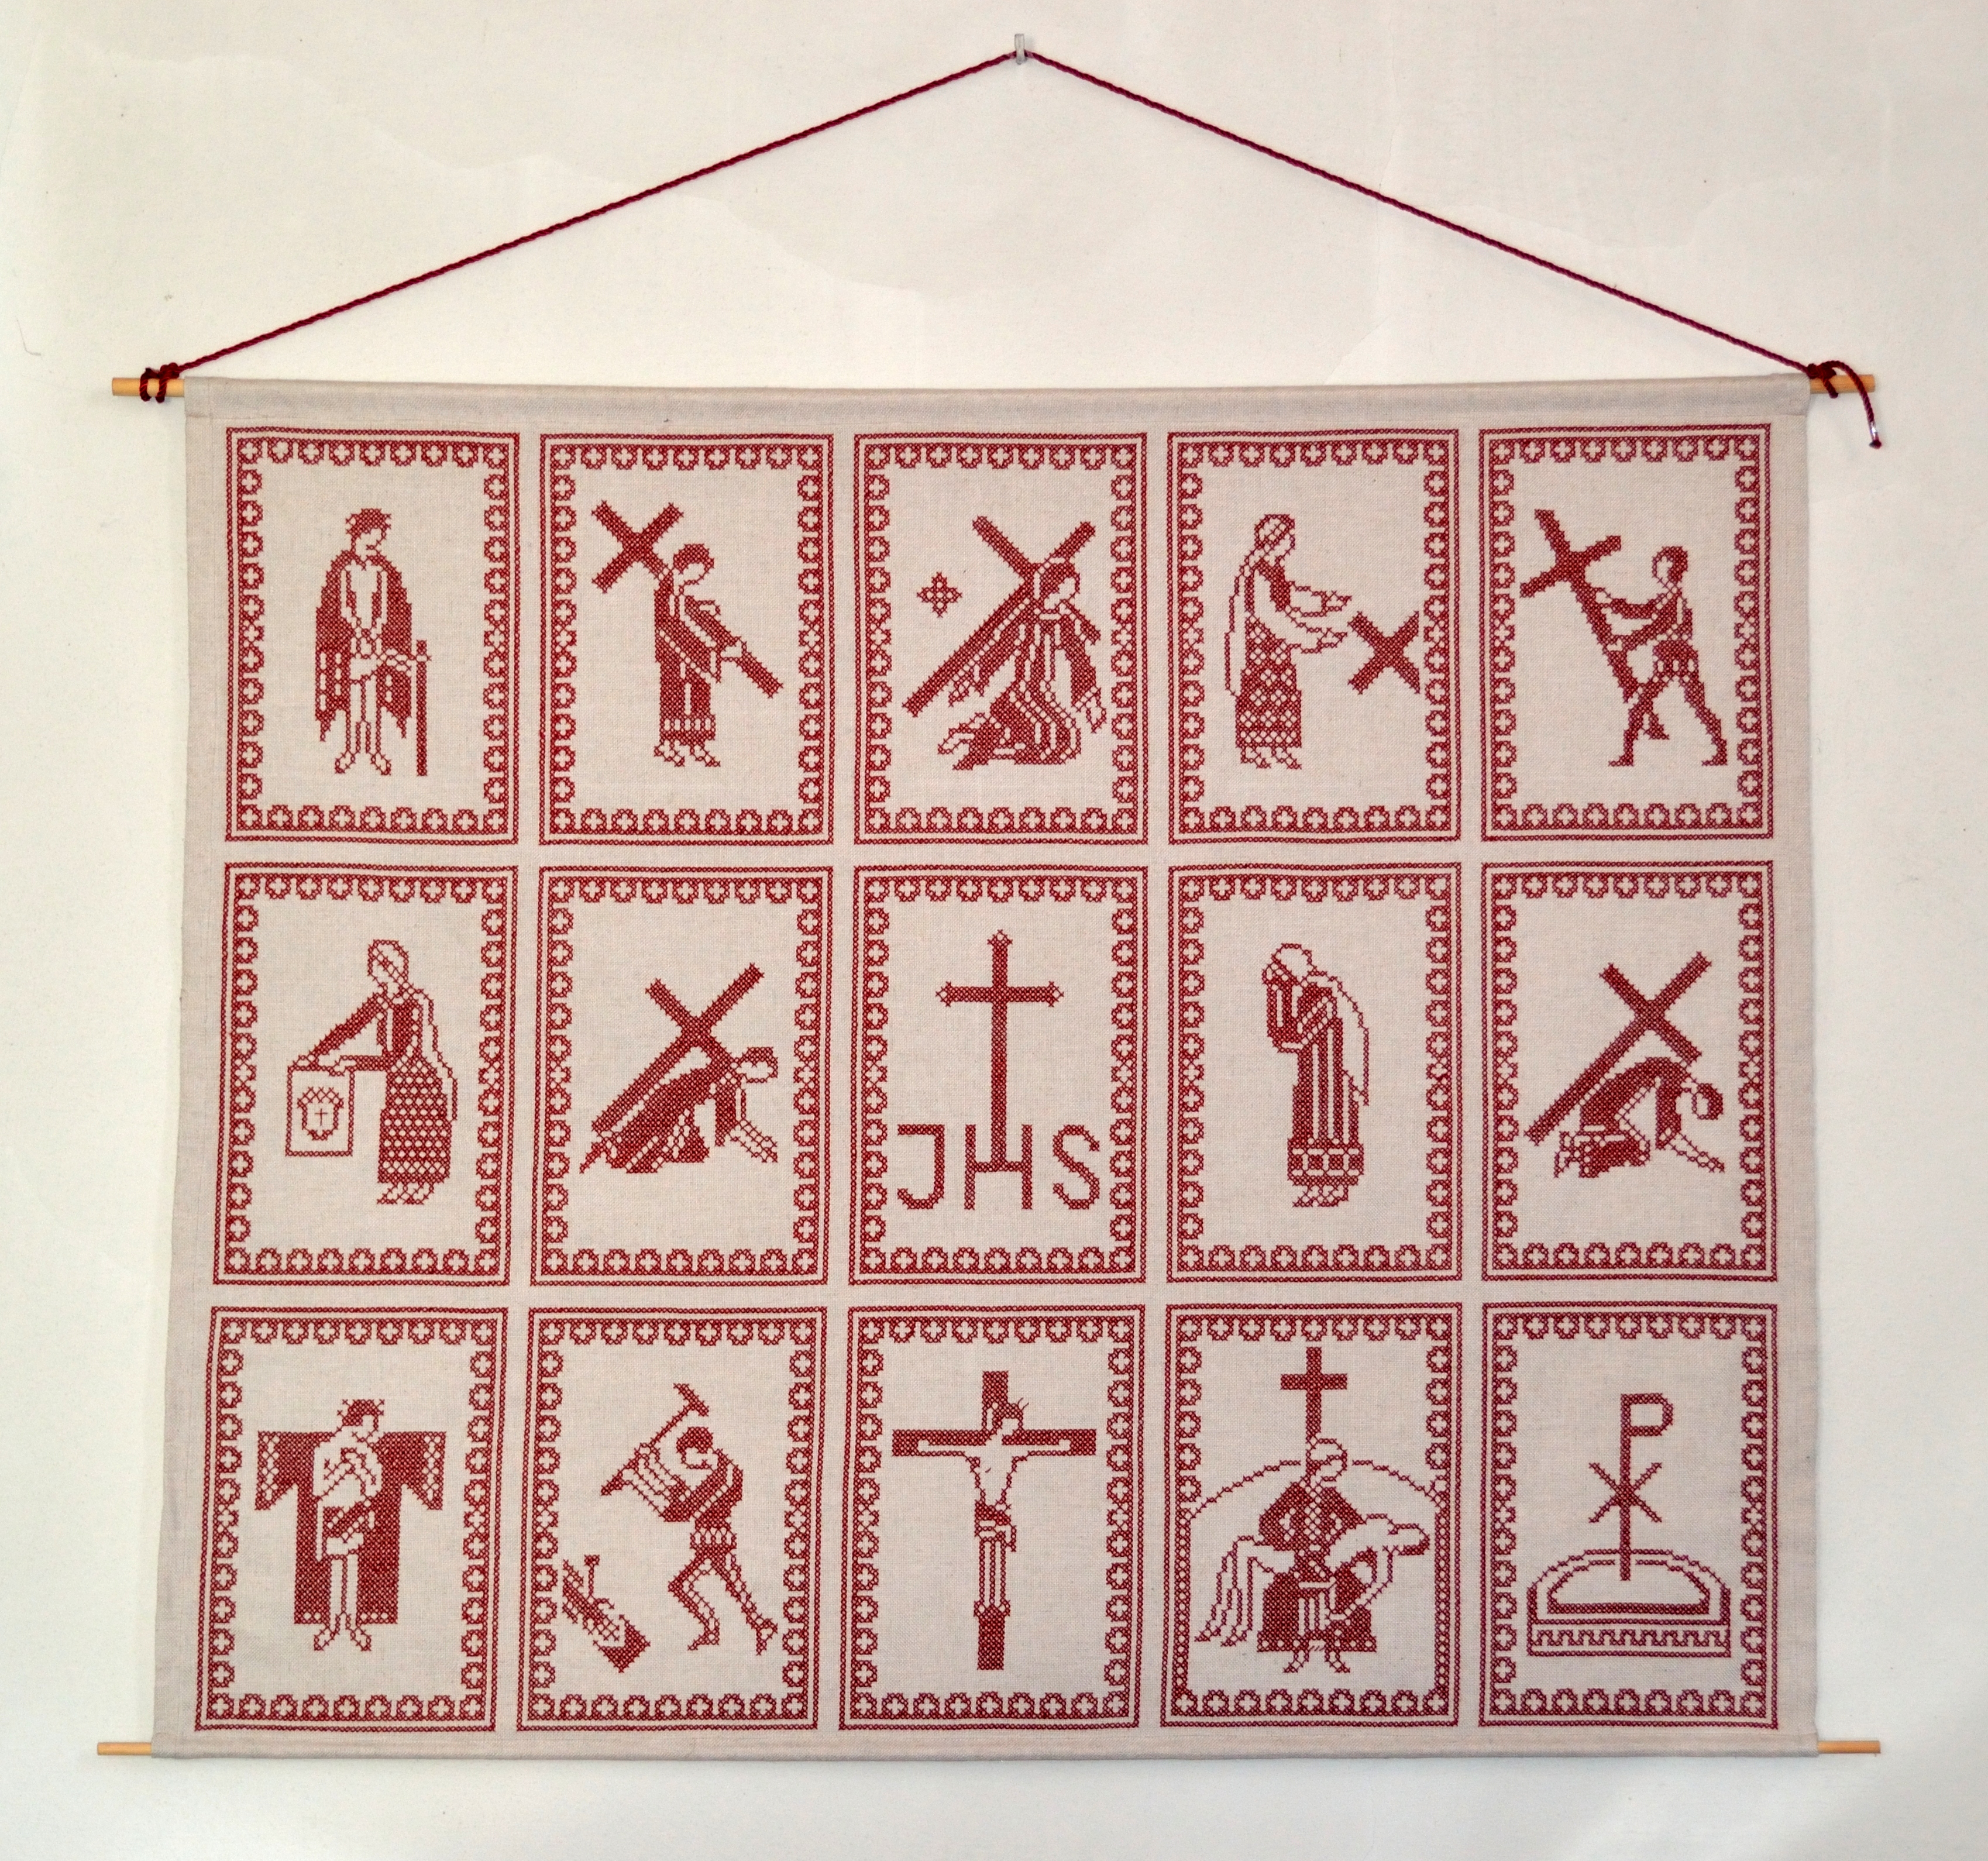 Embroidery of the Stations of the Cross, chapel St. Martin, Maria-Anzbach